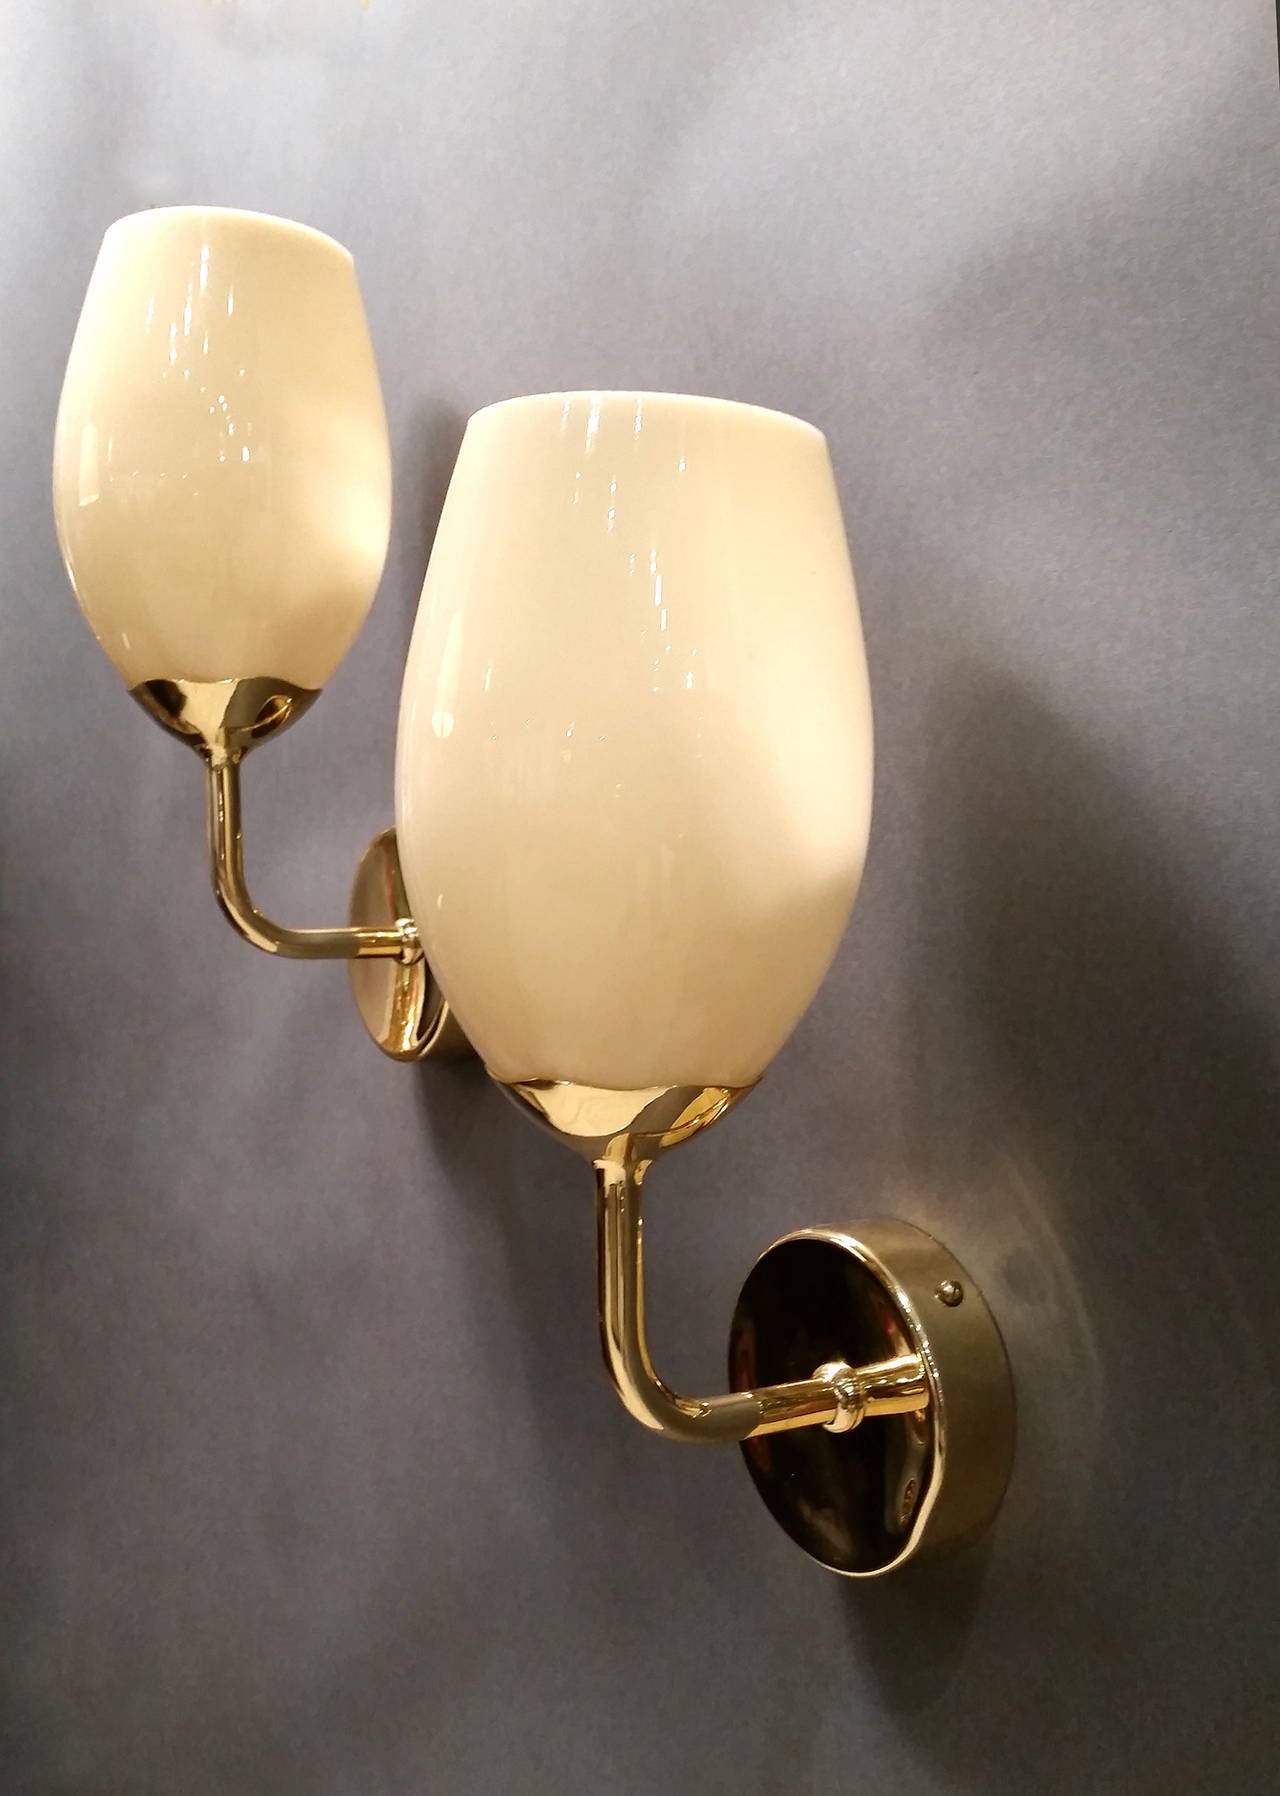 Early pair of sconces designed by Paavo Tynell for Taito Oy. Model no. 9447 stamped to mounting bracket. Opaque milk glass shades emit a pleasant colored warm light. Solid brass. Polished and re-lacquered.